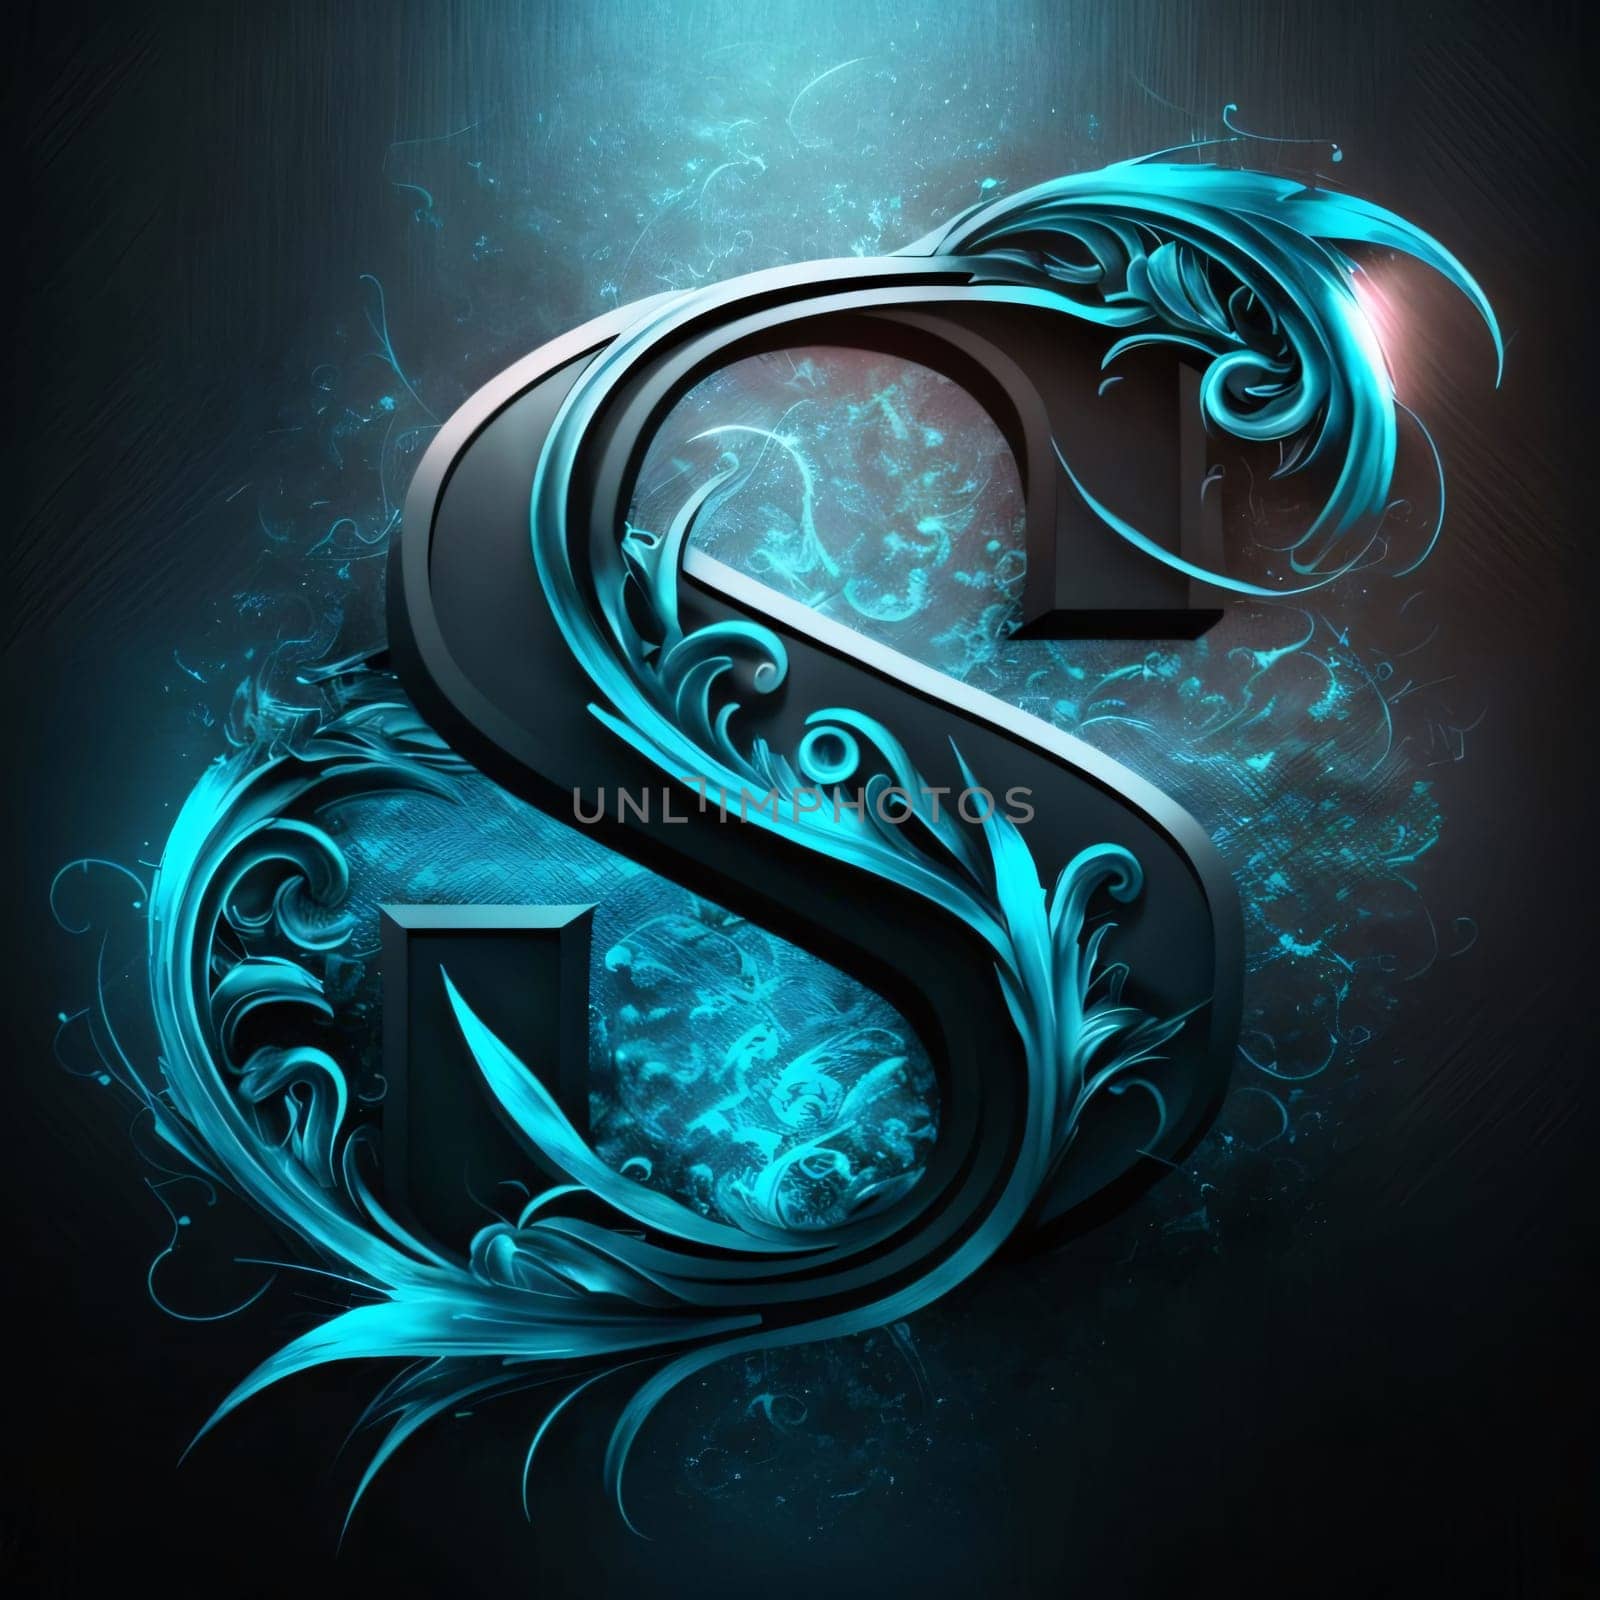 Graphic alphabet letters: Letter S in blue floral style on a dark background. Letter S